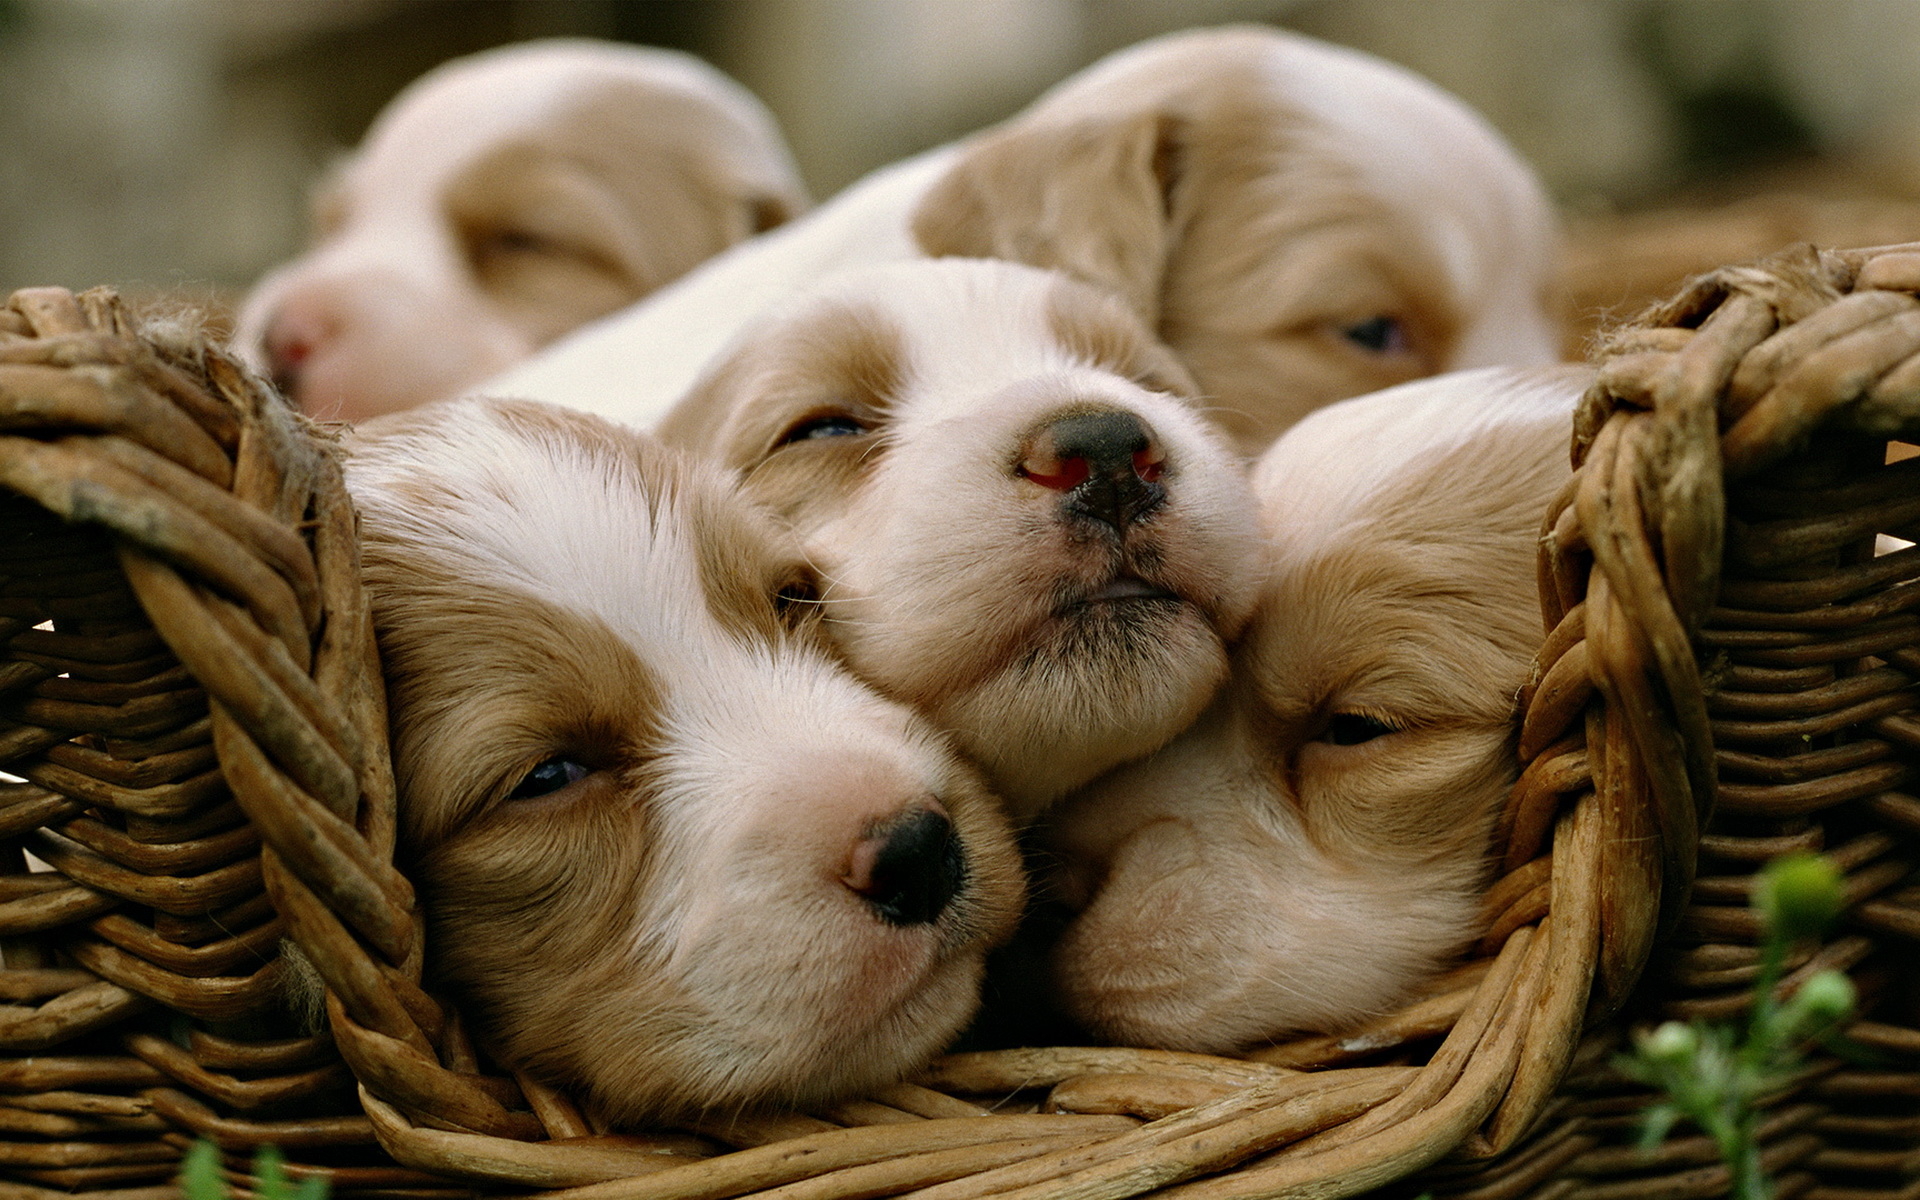 Animals_Dogs_Puppies_in_a_basket_030901_.jpg